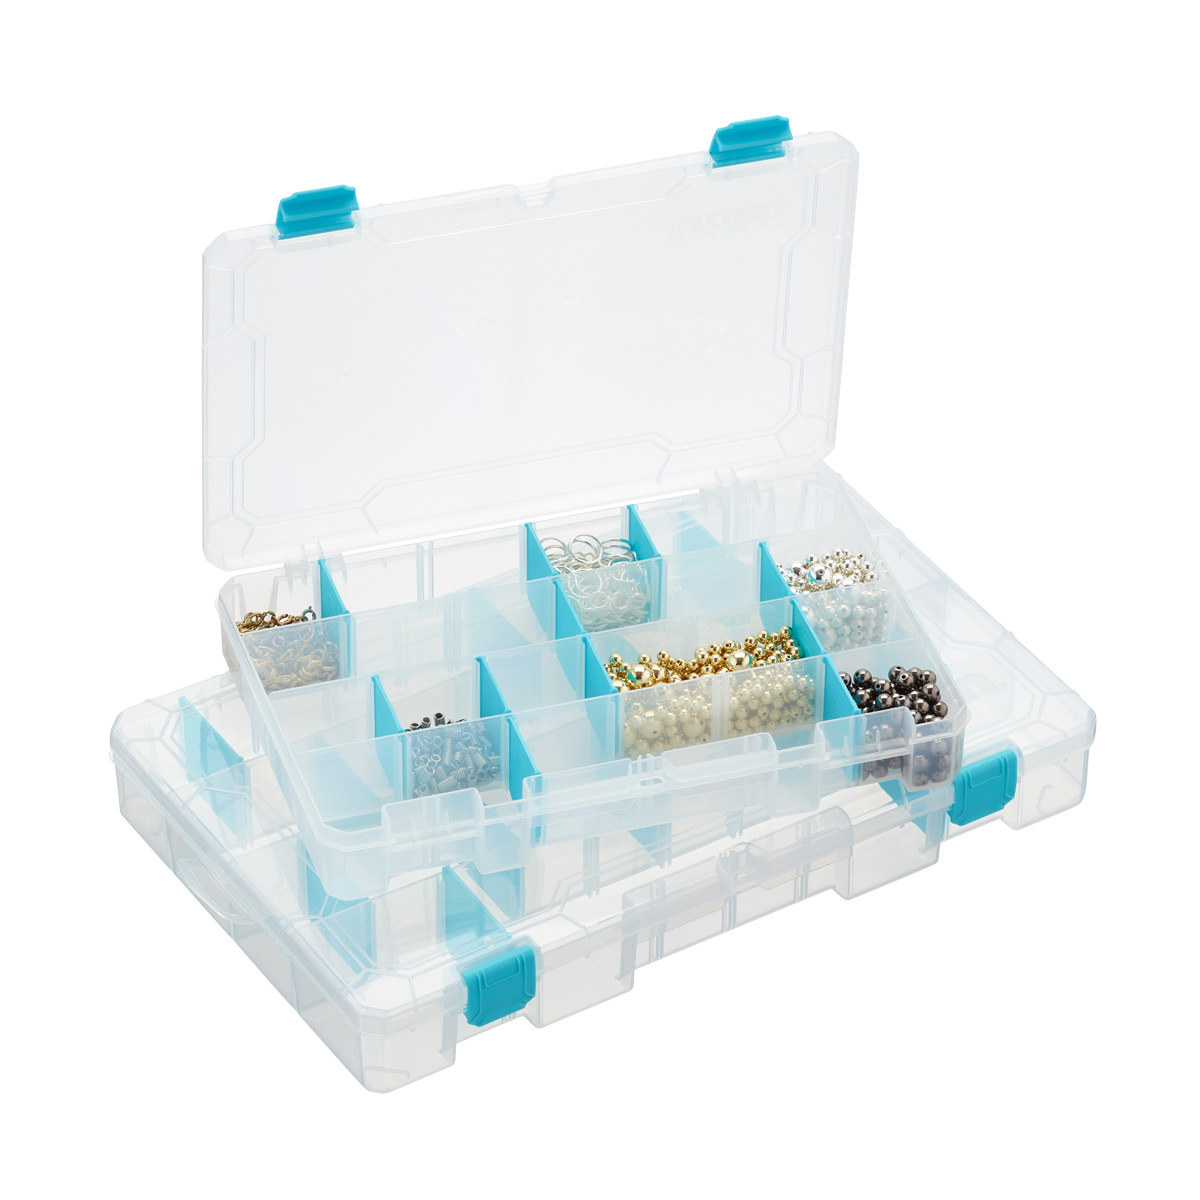  ArtBin 6847AG Medium Anti-Tarnish Box with Removable Dividers,  Jewelry & Craft Organizer with Anti-Tarnish Technology, [1] Plastic Storage  Case, Clear with Aqua Accents